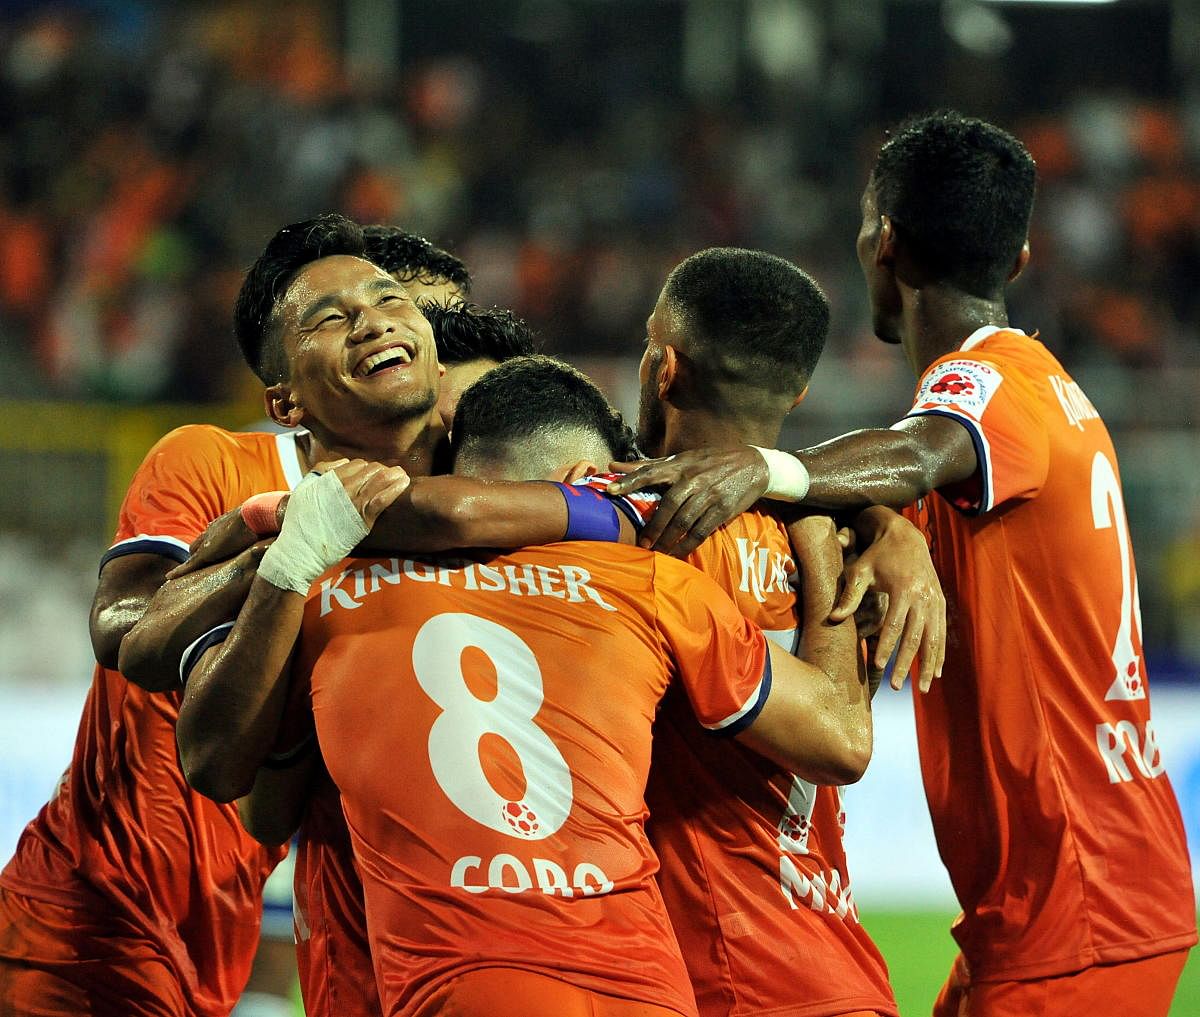 FC Goa player celebrate after their win against Chennayin FC in the 4th match of the 6th edition of the ISL played at Nehru Stadium, Fatorda, Goa, Wednesday, Oct. 23, 2019. (PTI Photo)